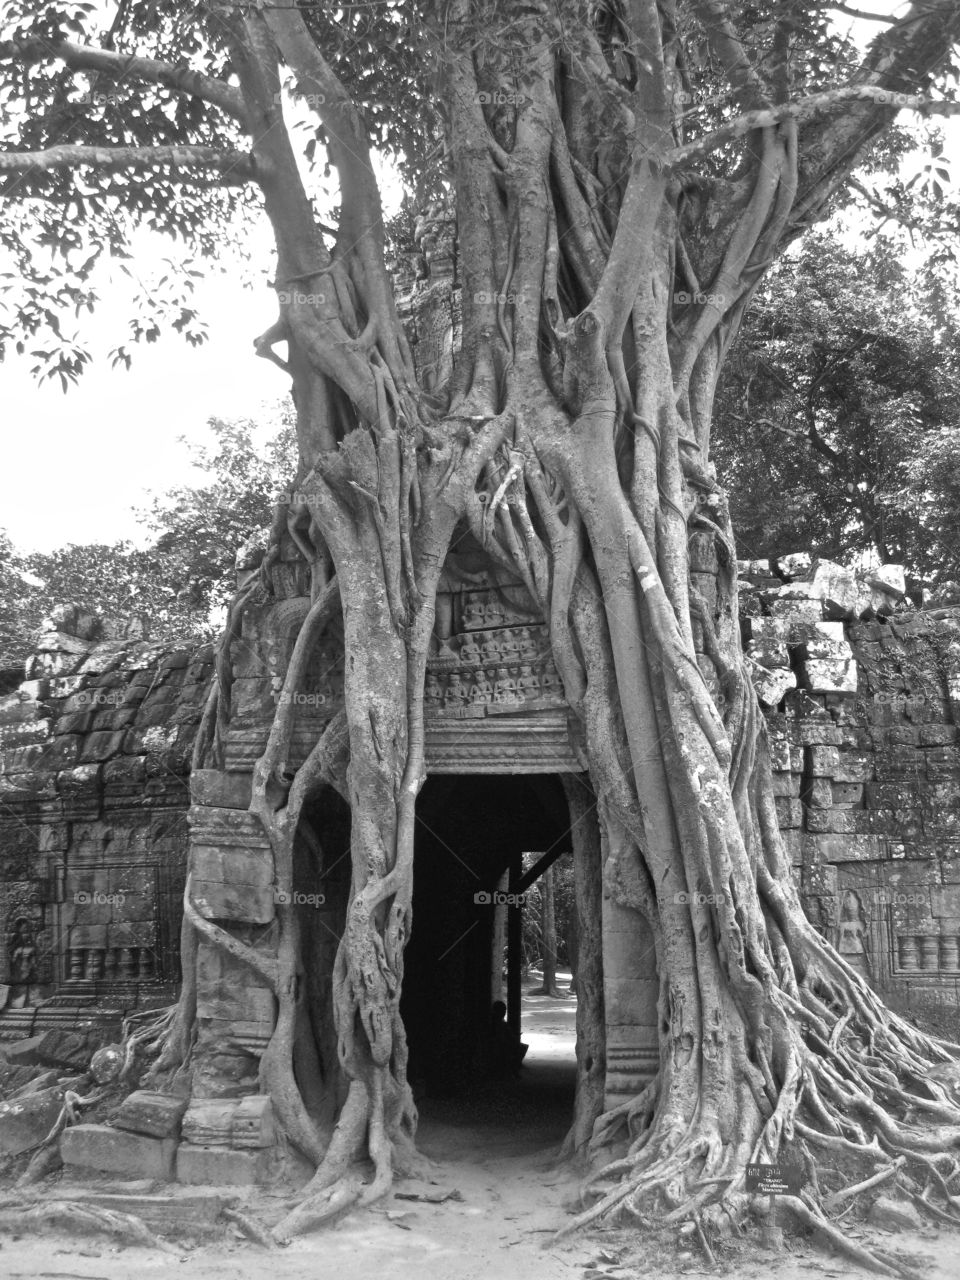 Old Buddhist monastery with large tree roots